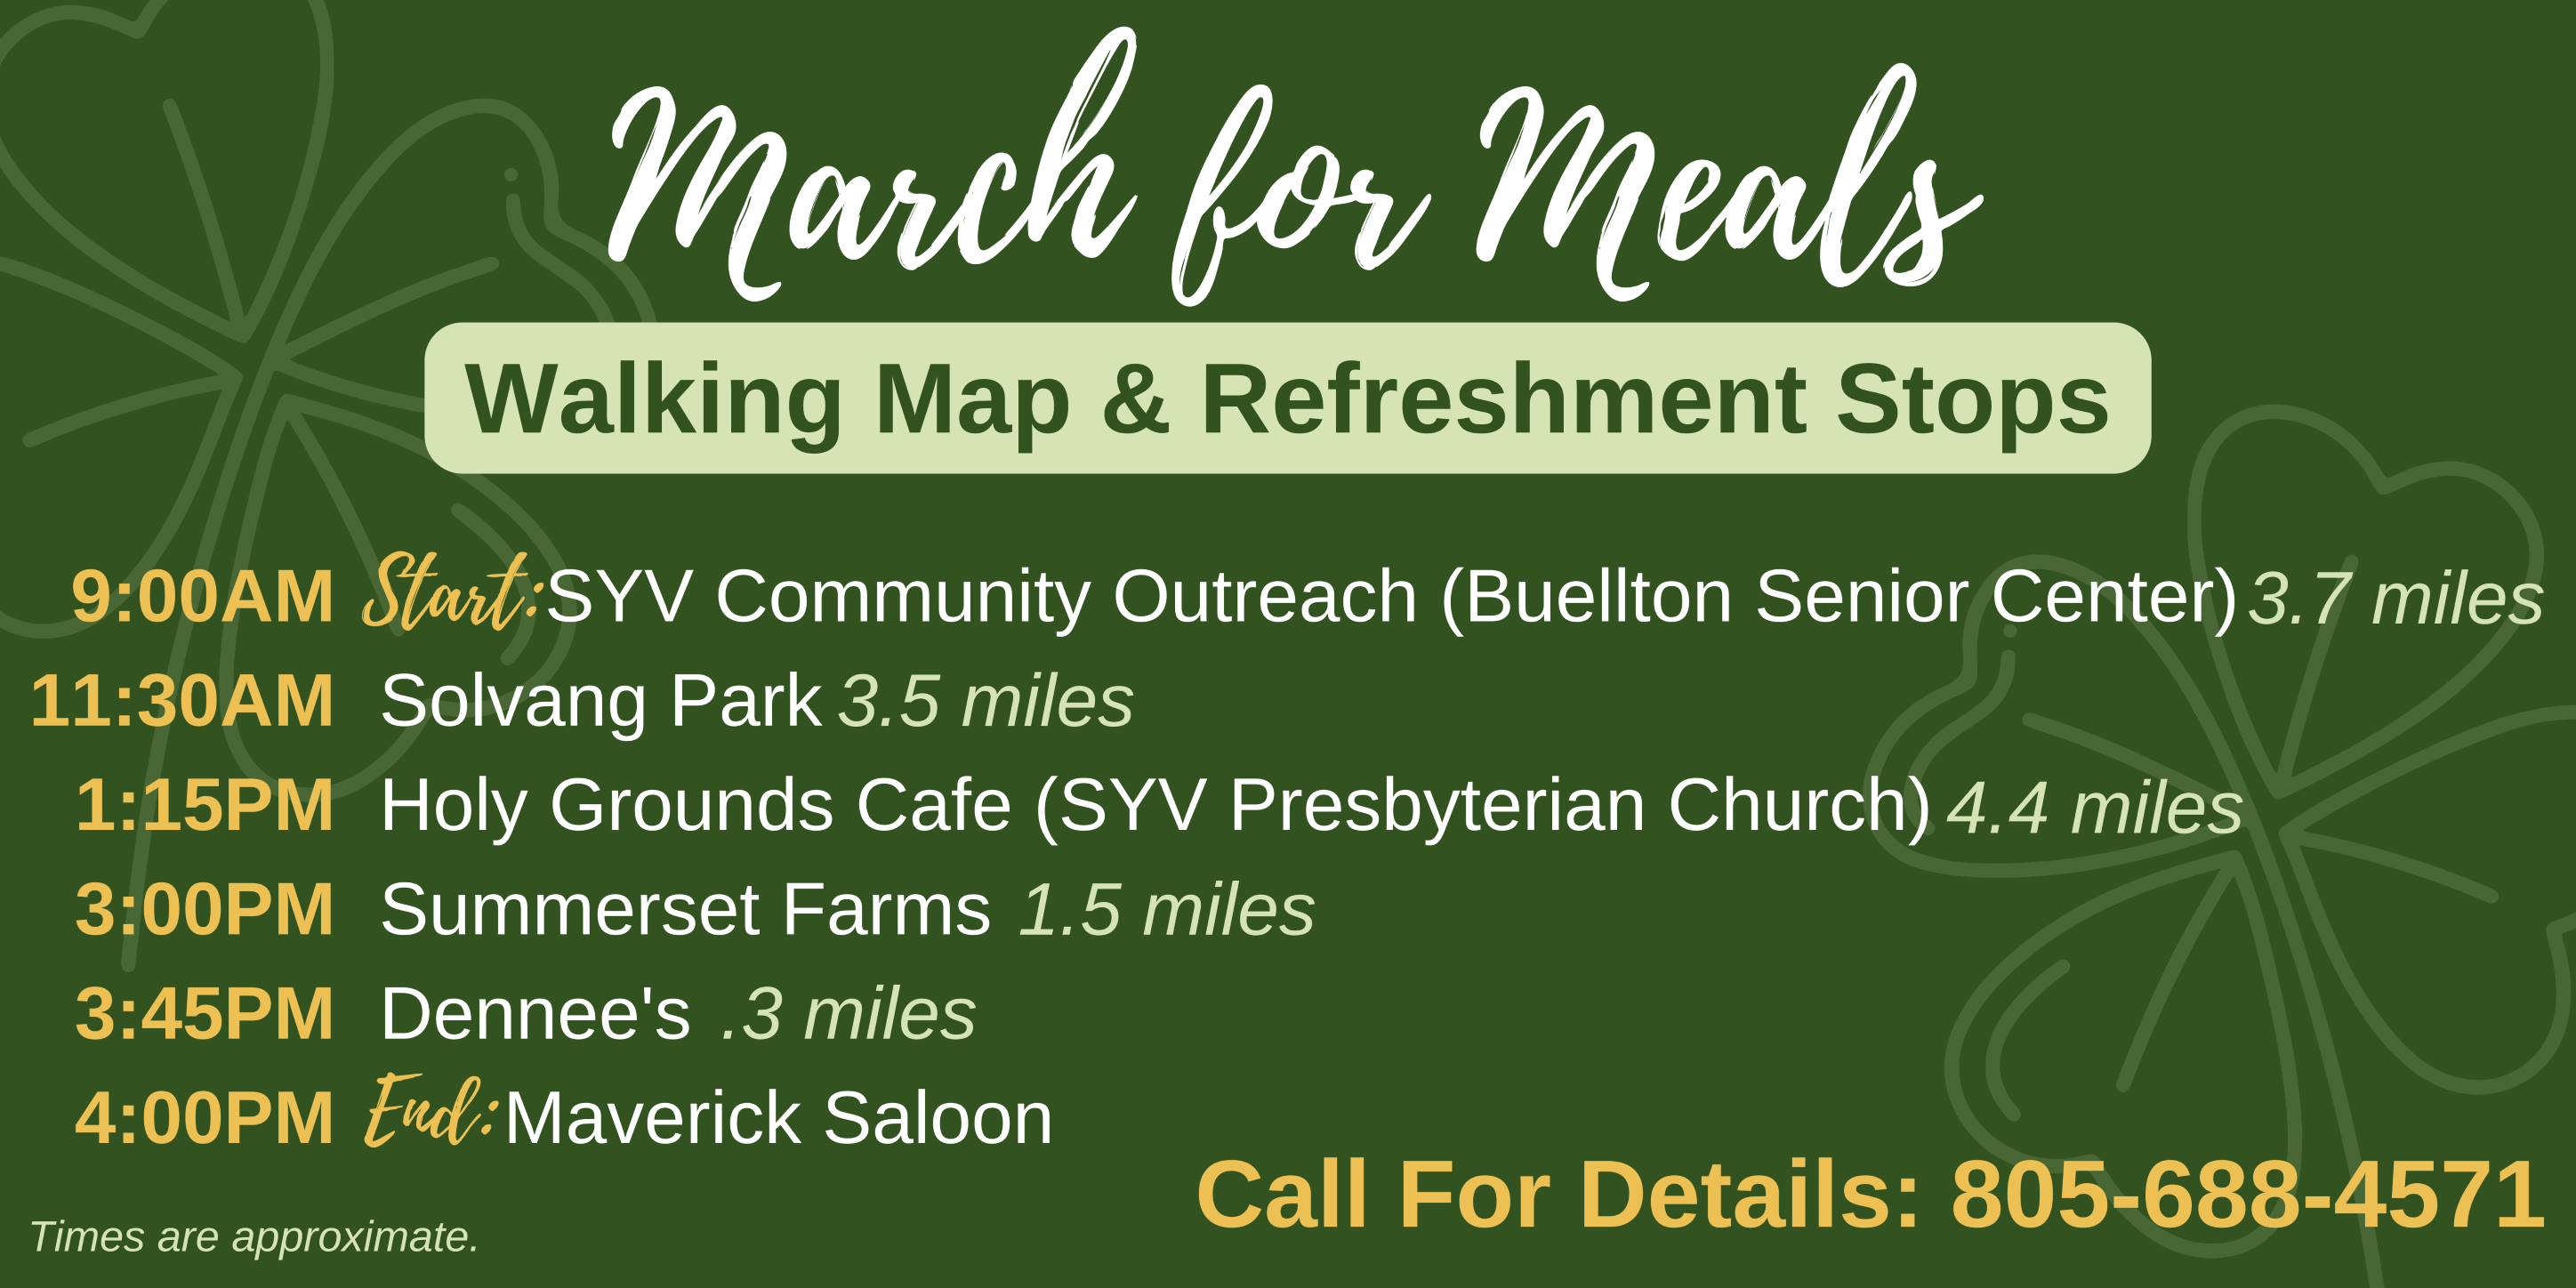 SYVCO March for Meals Times